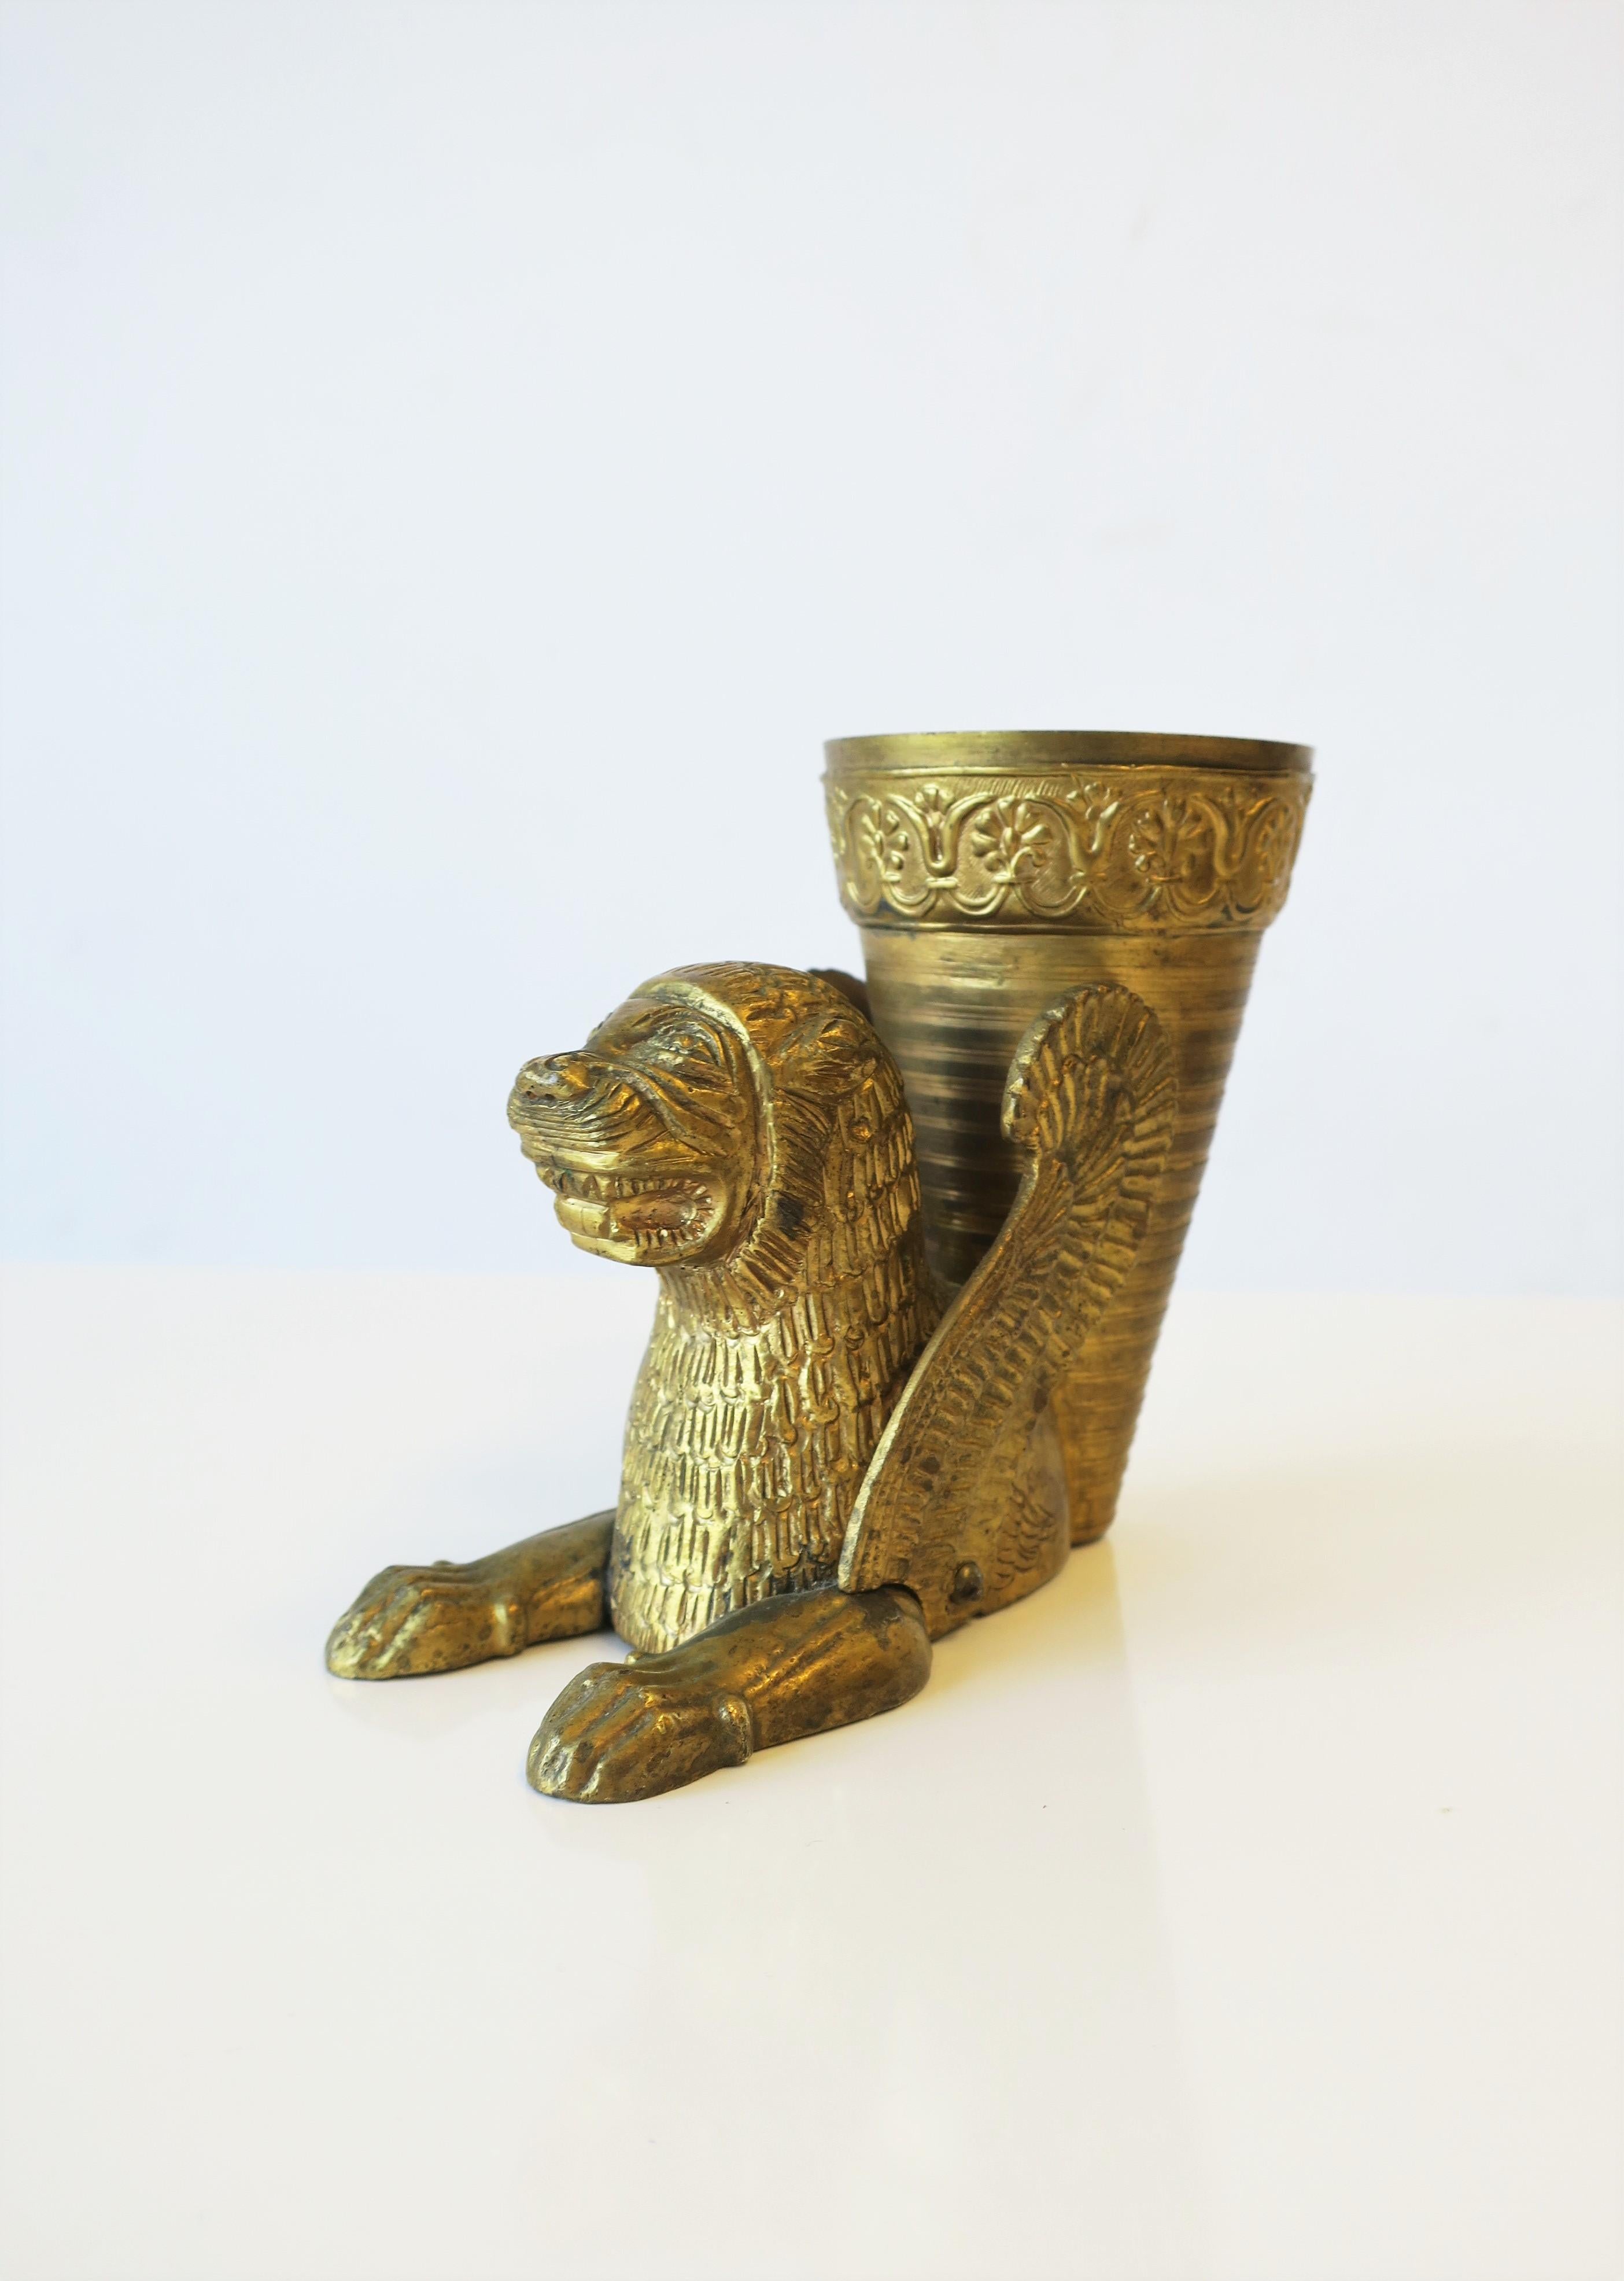 20th Century Gilt Bronze Lion Cat Vase in the Egyptian Revival Style For Sale